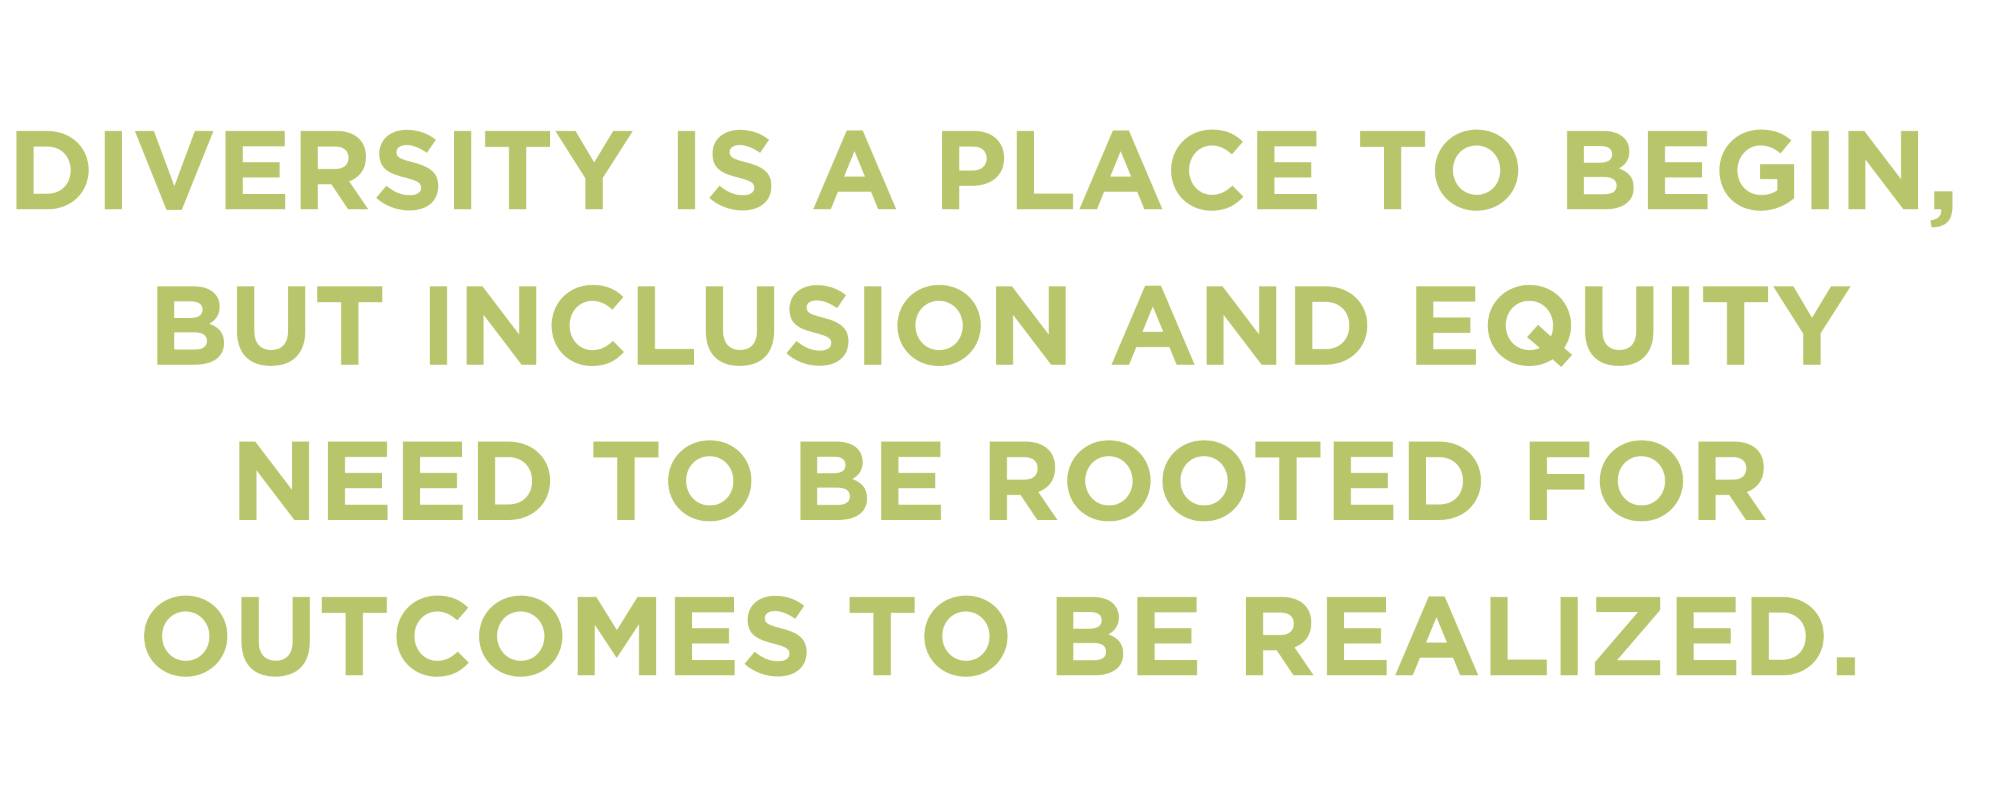 DIVERSITY IS A PLACE TO BEGIN, BUT INCLUSION AND EQUITY NEED TO BE ROOTED FOR OUTCOMES TO BE REALIZED.